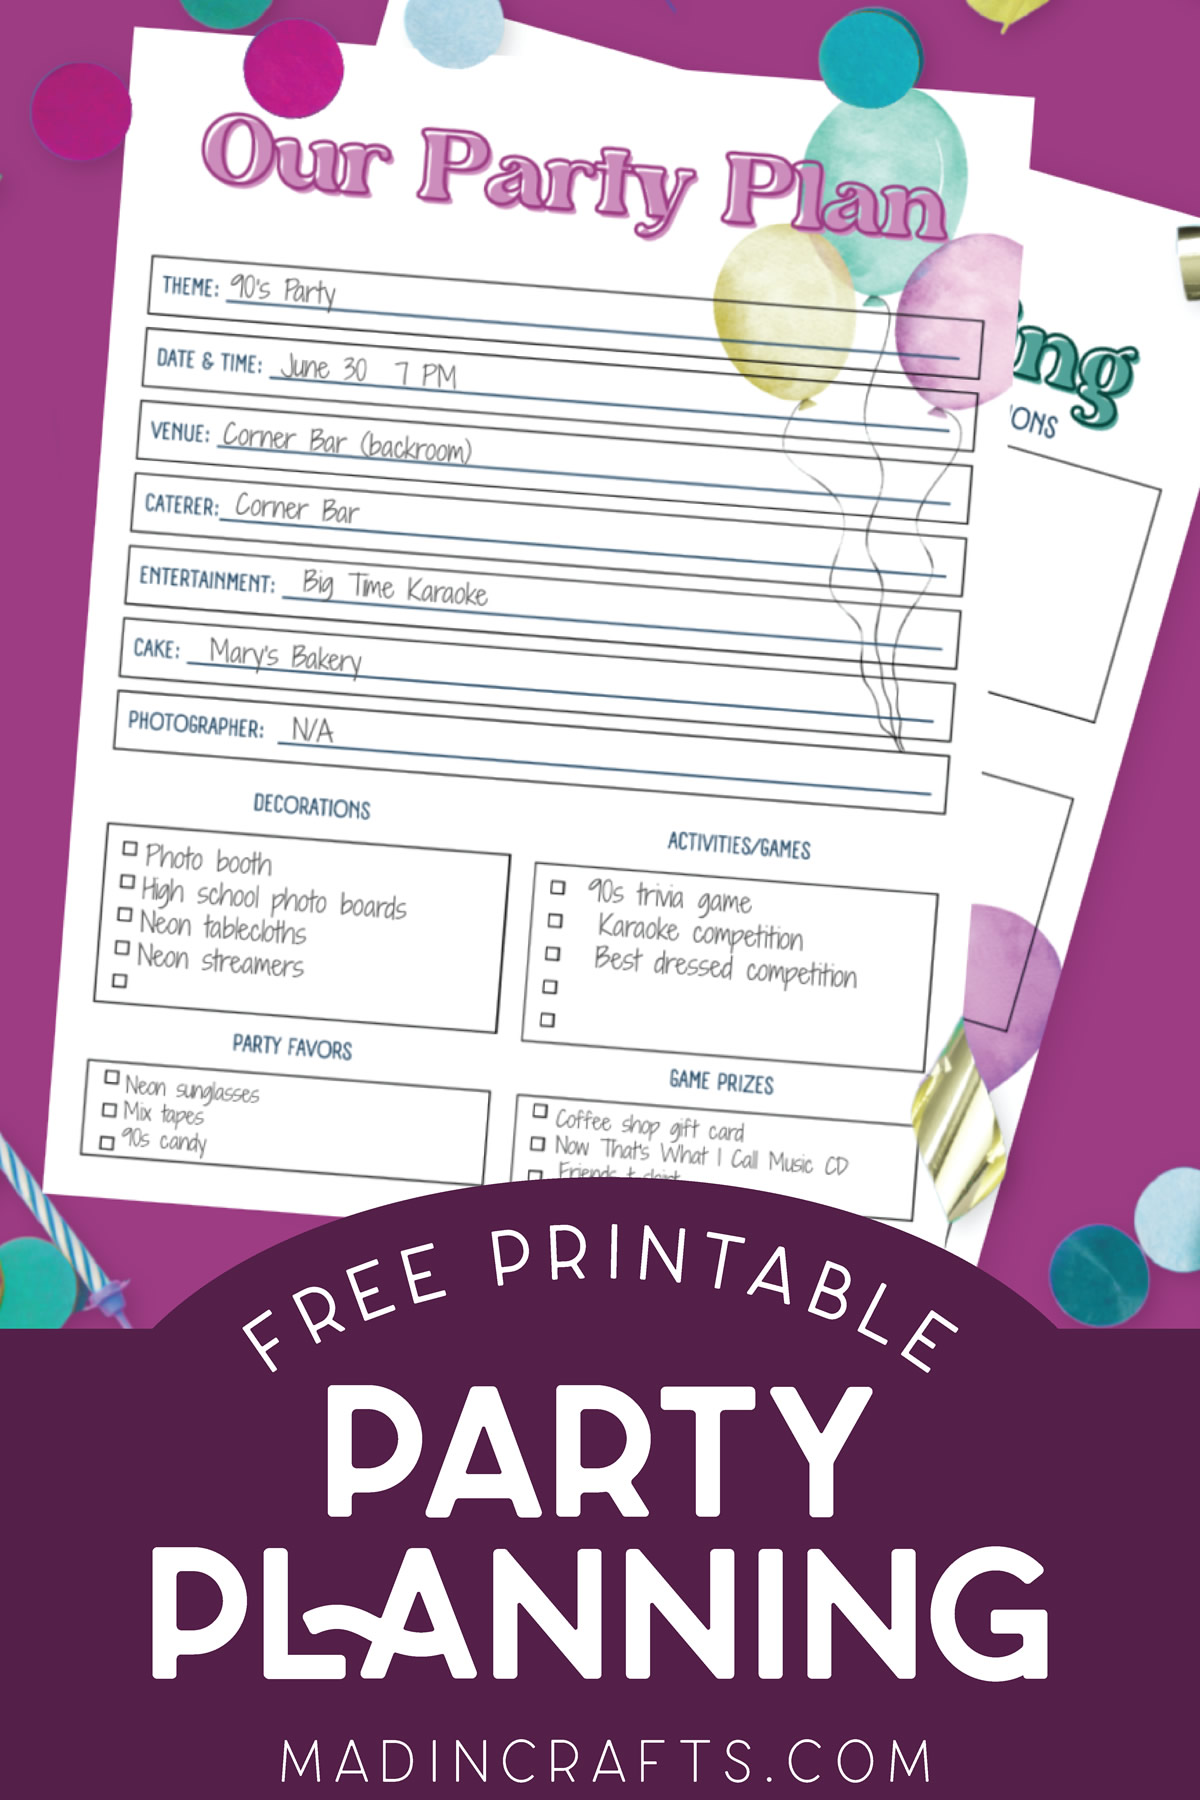 Two party planning printables on a purple background surrounded by confetti.